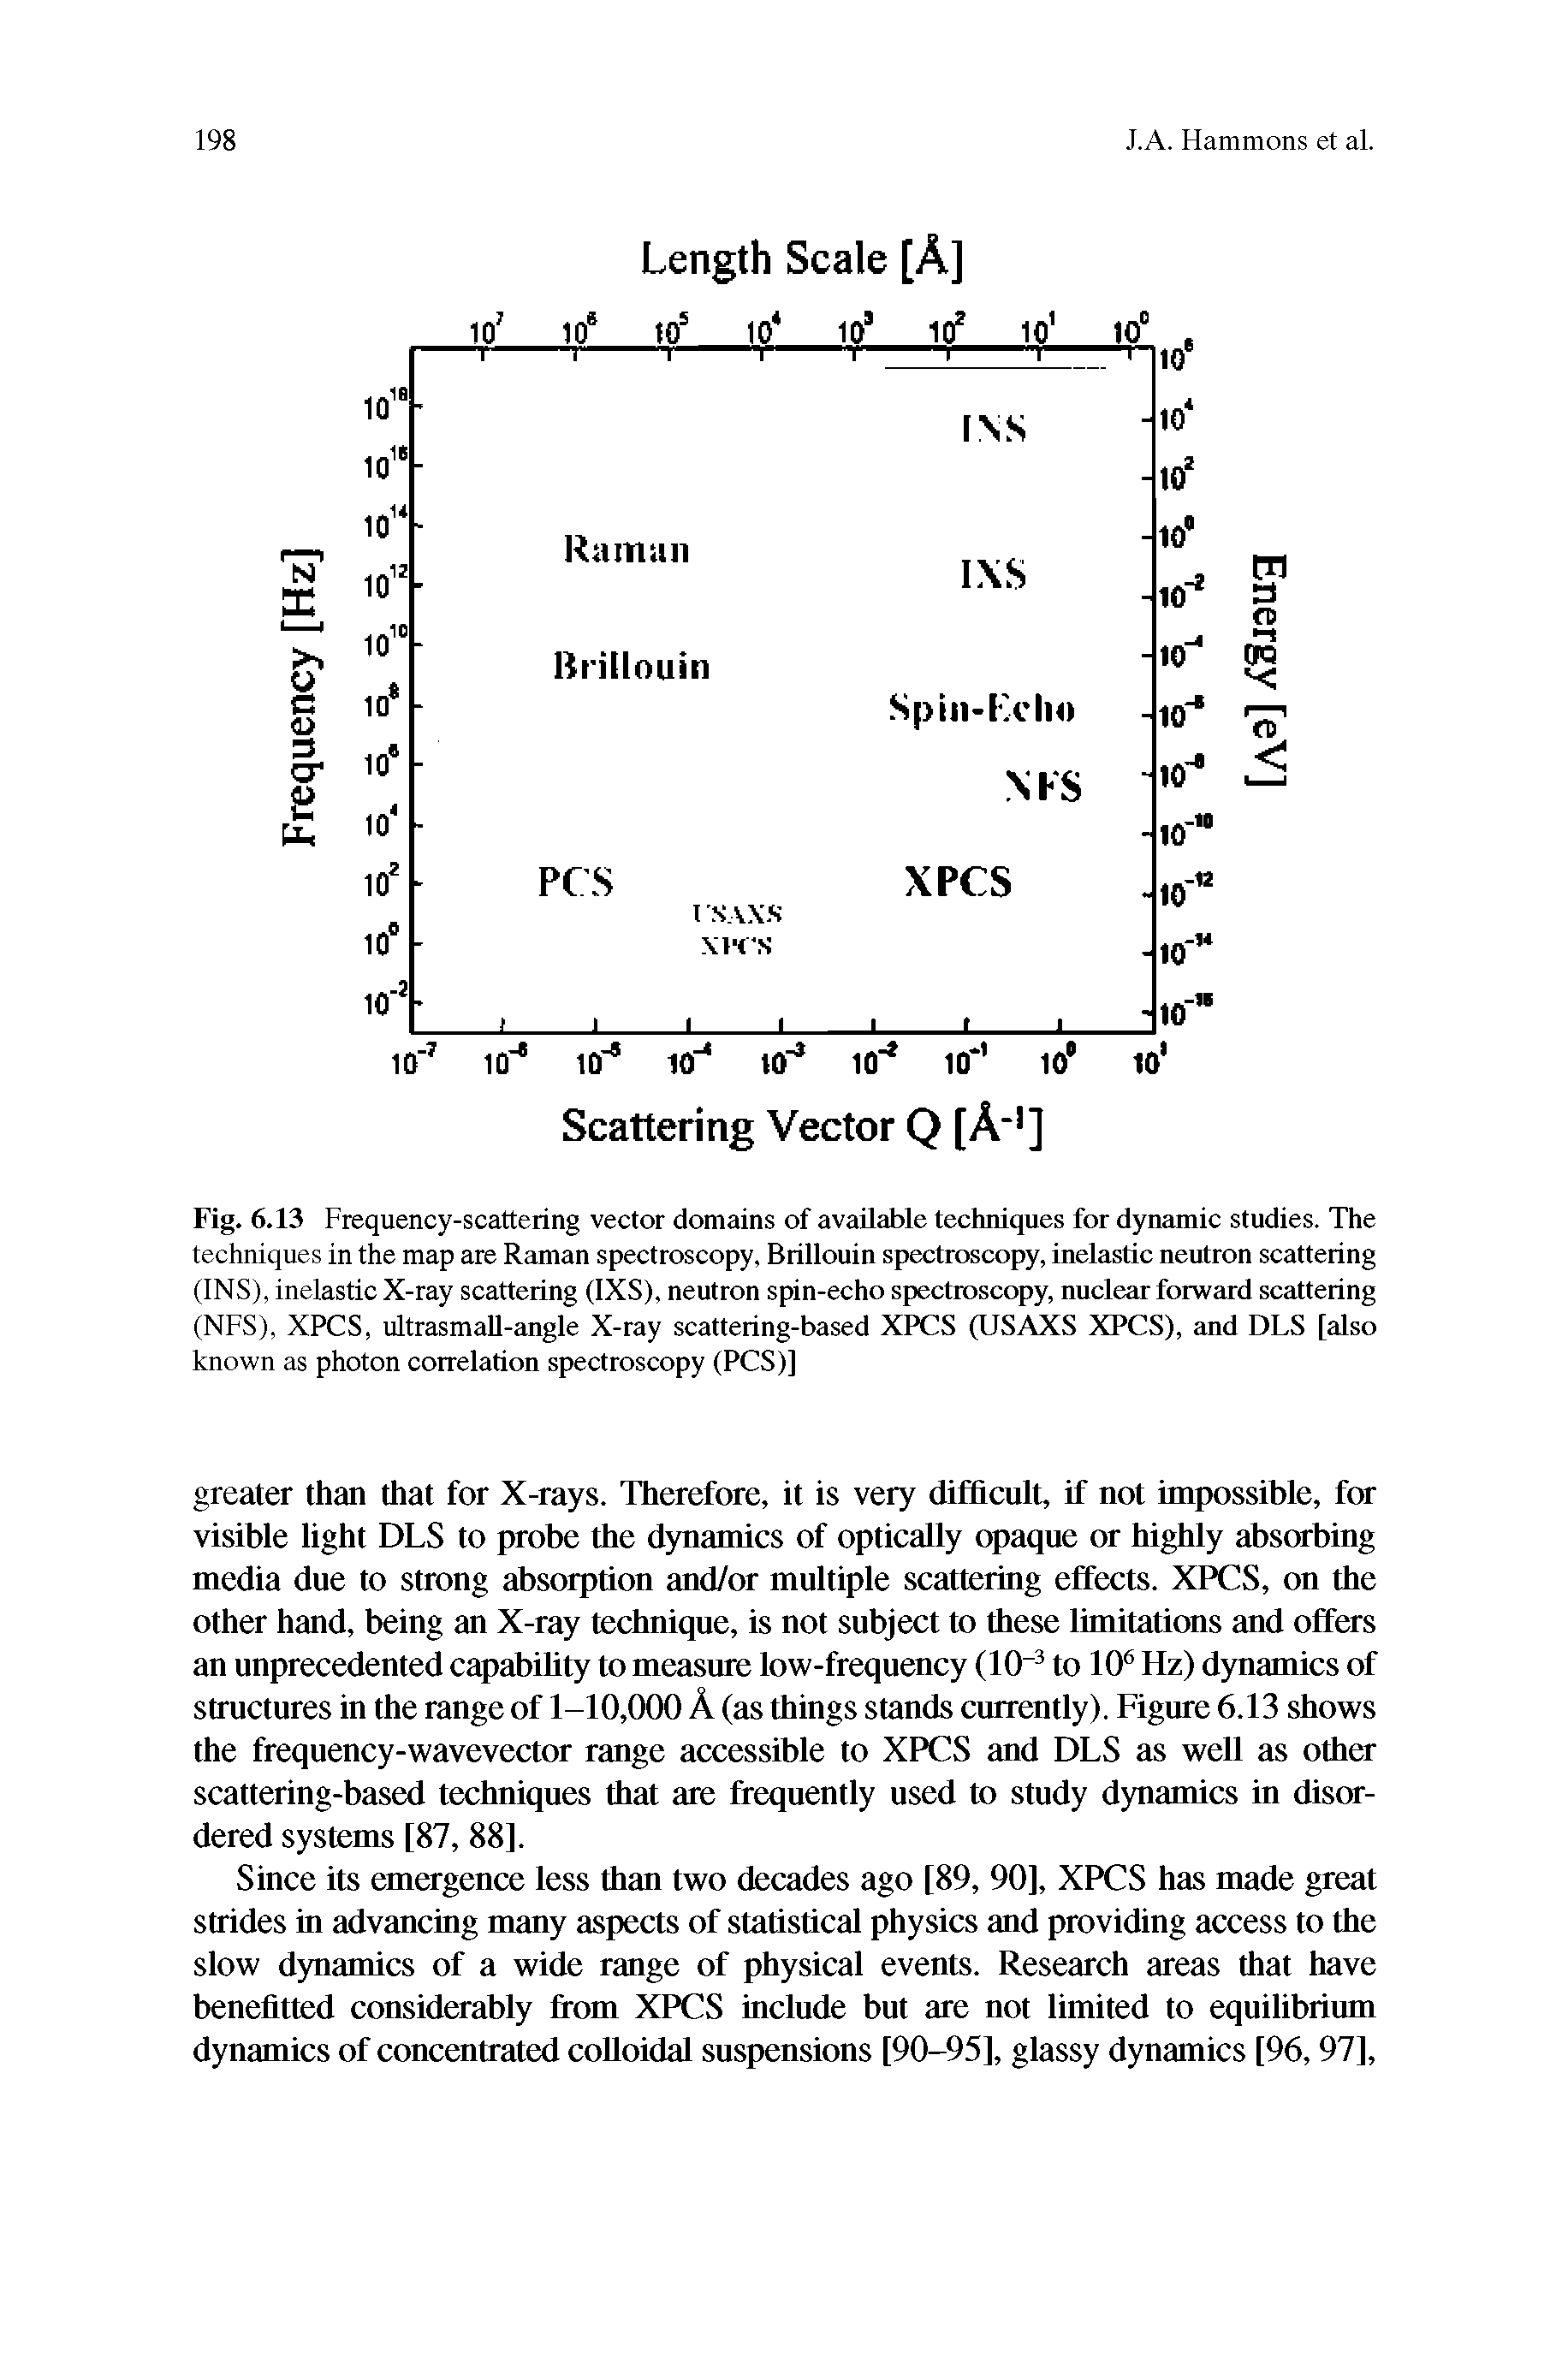 Fig. 6.13 Frequency-scattering vector domeiins of available techniques for dynamic studies. The techniques in the map are Raman spectroscopy, Brillouin spectroscopy, inelastic neutron scattering (INS), inelastic X-ray scattering (IXS), neutron spin-echo spectroscopy, nuclear forward scattering (NFS), XPCS, ultrasmaU-angle X-ray scattering-based XPCS (USAXS XPCS), and DLS [also known as photon correlation spectroscopy (PCS)]...